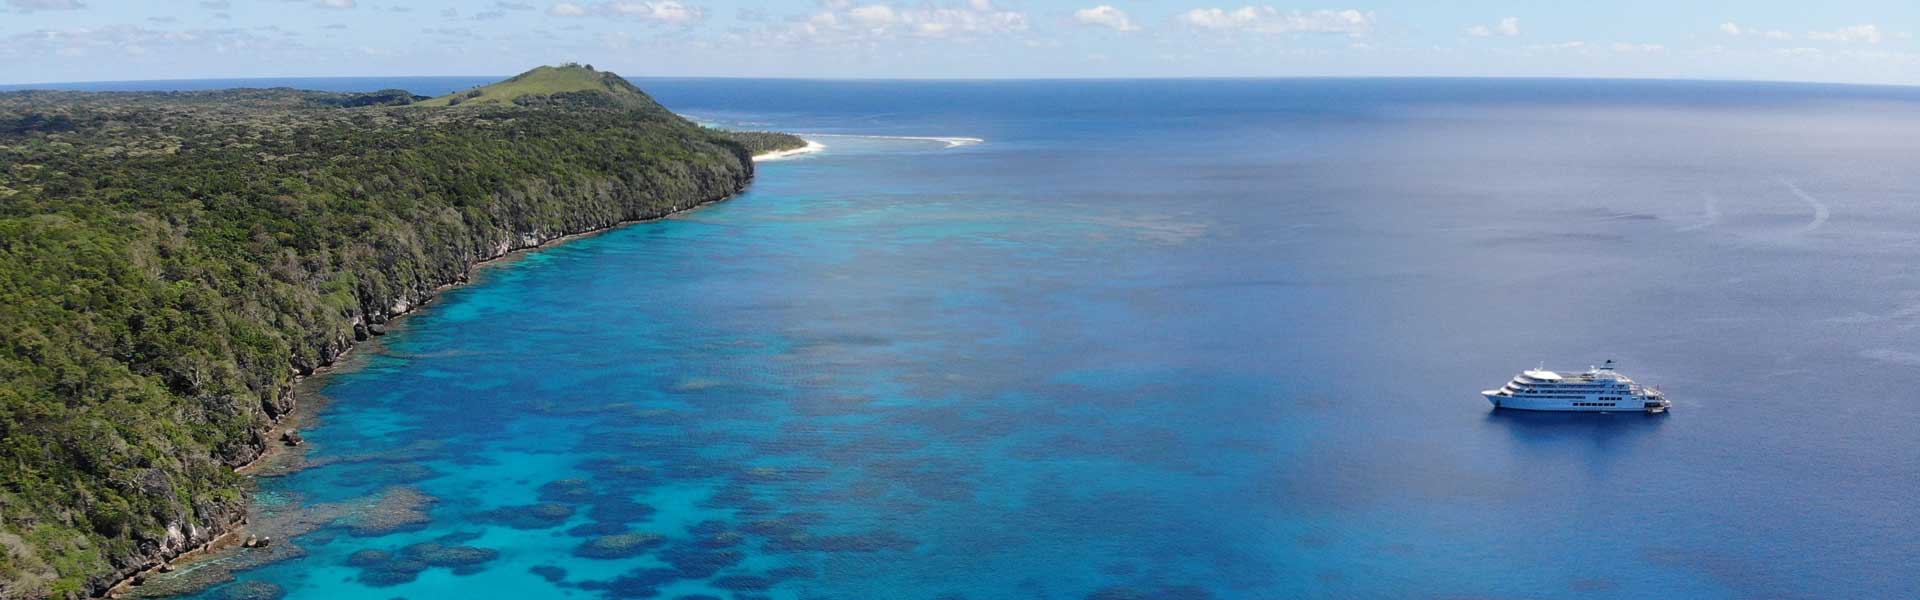 Cruise Package for Two (7 Nights in Mamanuca & Yasawa Islands) with Flights, Transfers and More!